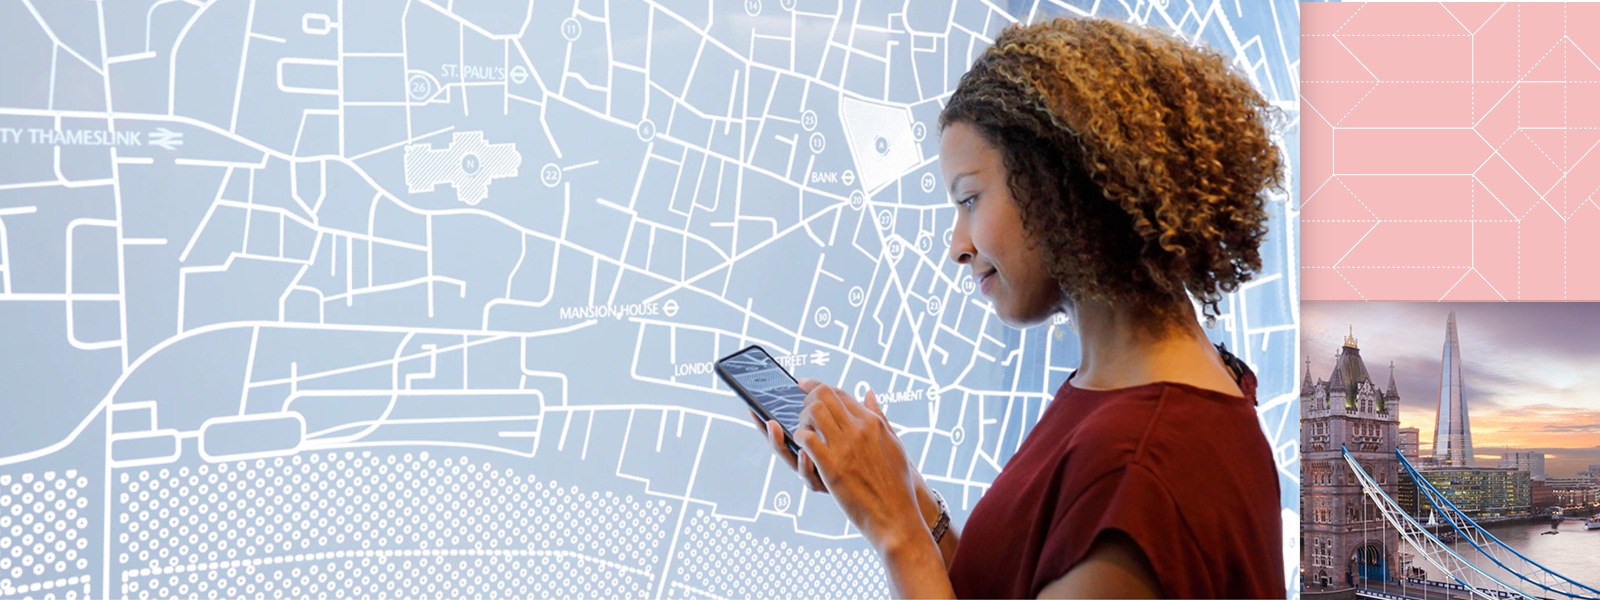 Woman uses a mobile device in front of a map display with an abstract overlay.